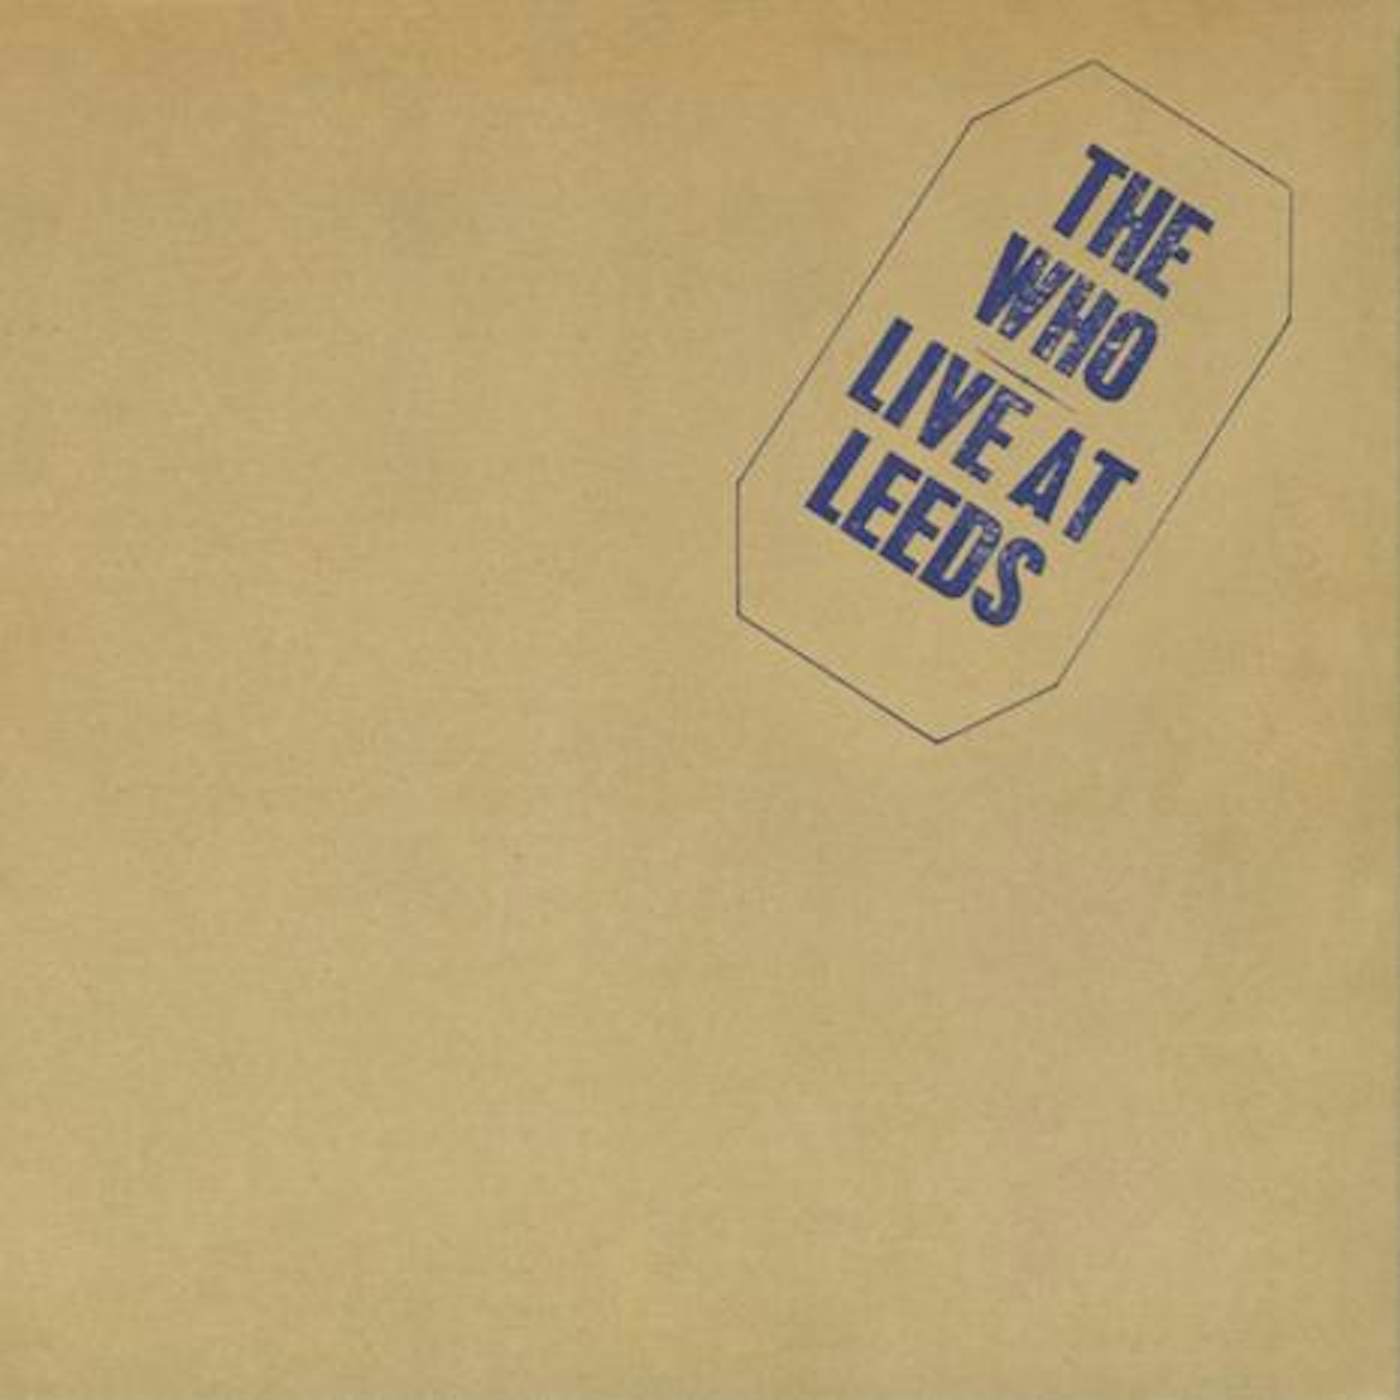 The Who Live At Leeds Vinyl Record